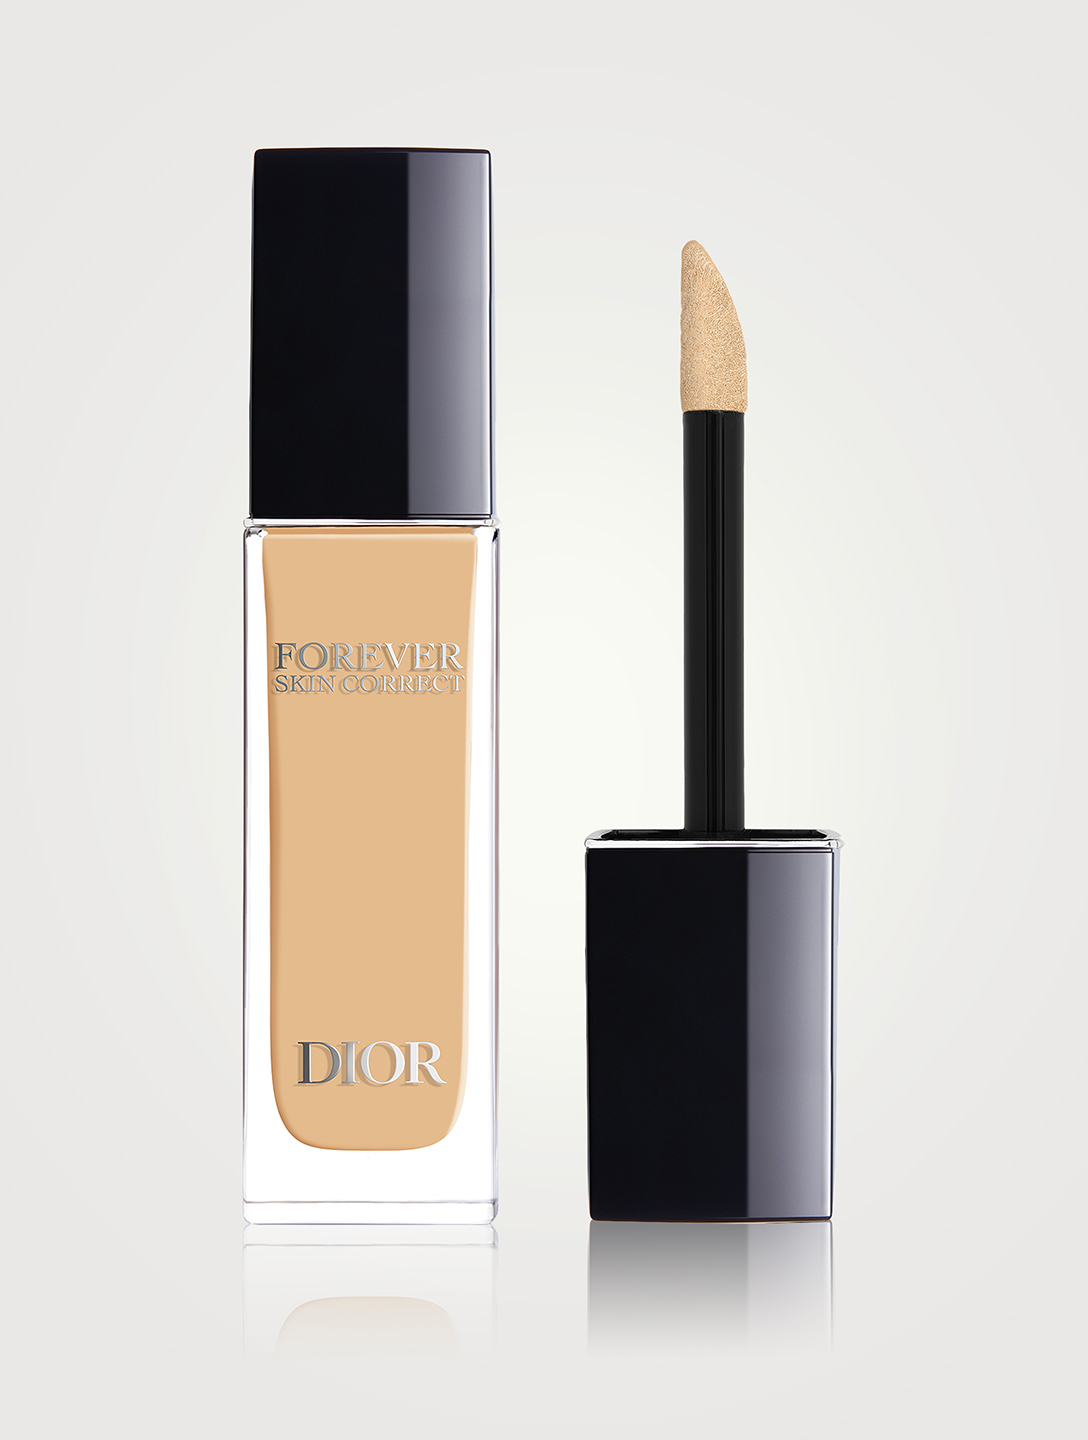 FOREVER SKIN CORRECT, Full-coverage concealer from Dior / 2 WO Warm Olive